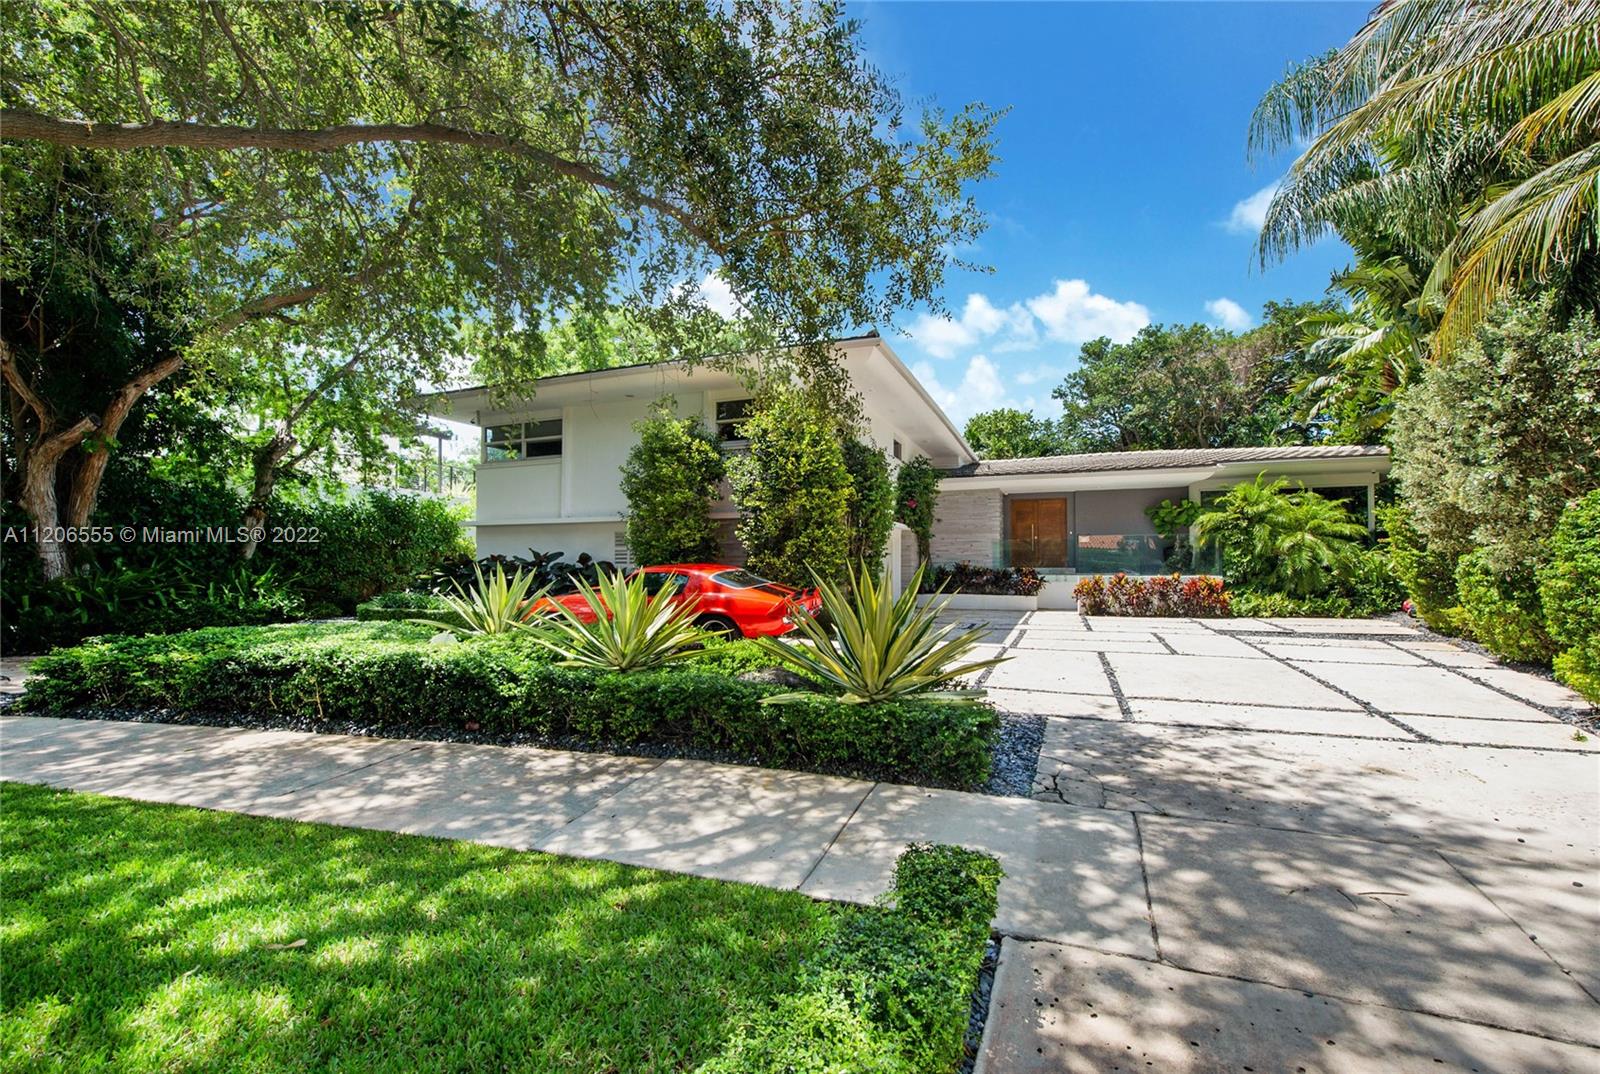 Totally redone in 2014 and 2017 - private & oversized 17K+ Lot with Tropical Landscaping. Move-in-ready, five-bedroom tri level home features bright and spacious Living areas, formal dining, family & work-out rooms, plenty of storage space, impact resistant windows and doors. Generous size Master Suite with spa-like bathroom and walk-in closet. All new 1,000+ SF open Summer Kitchen (not included in recorded SF) with full Cabana Bath overlooking an oversized pool, spa and terrace. Beautiful property has mature oaks and includes a children's playground with Tree House.  Neighborhood offers 24/7 police patrol protection. Low local traffic, quiet surrounds and a no flood zone. Walking distance to Mercy Hospital, Villa Vizcaya and LaSalle High school.